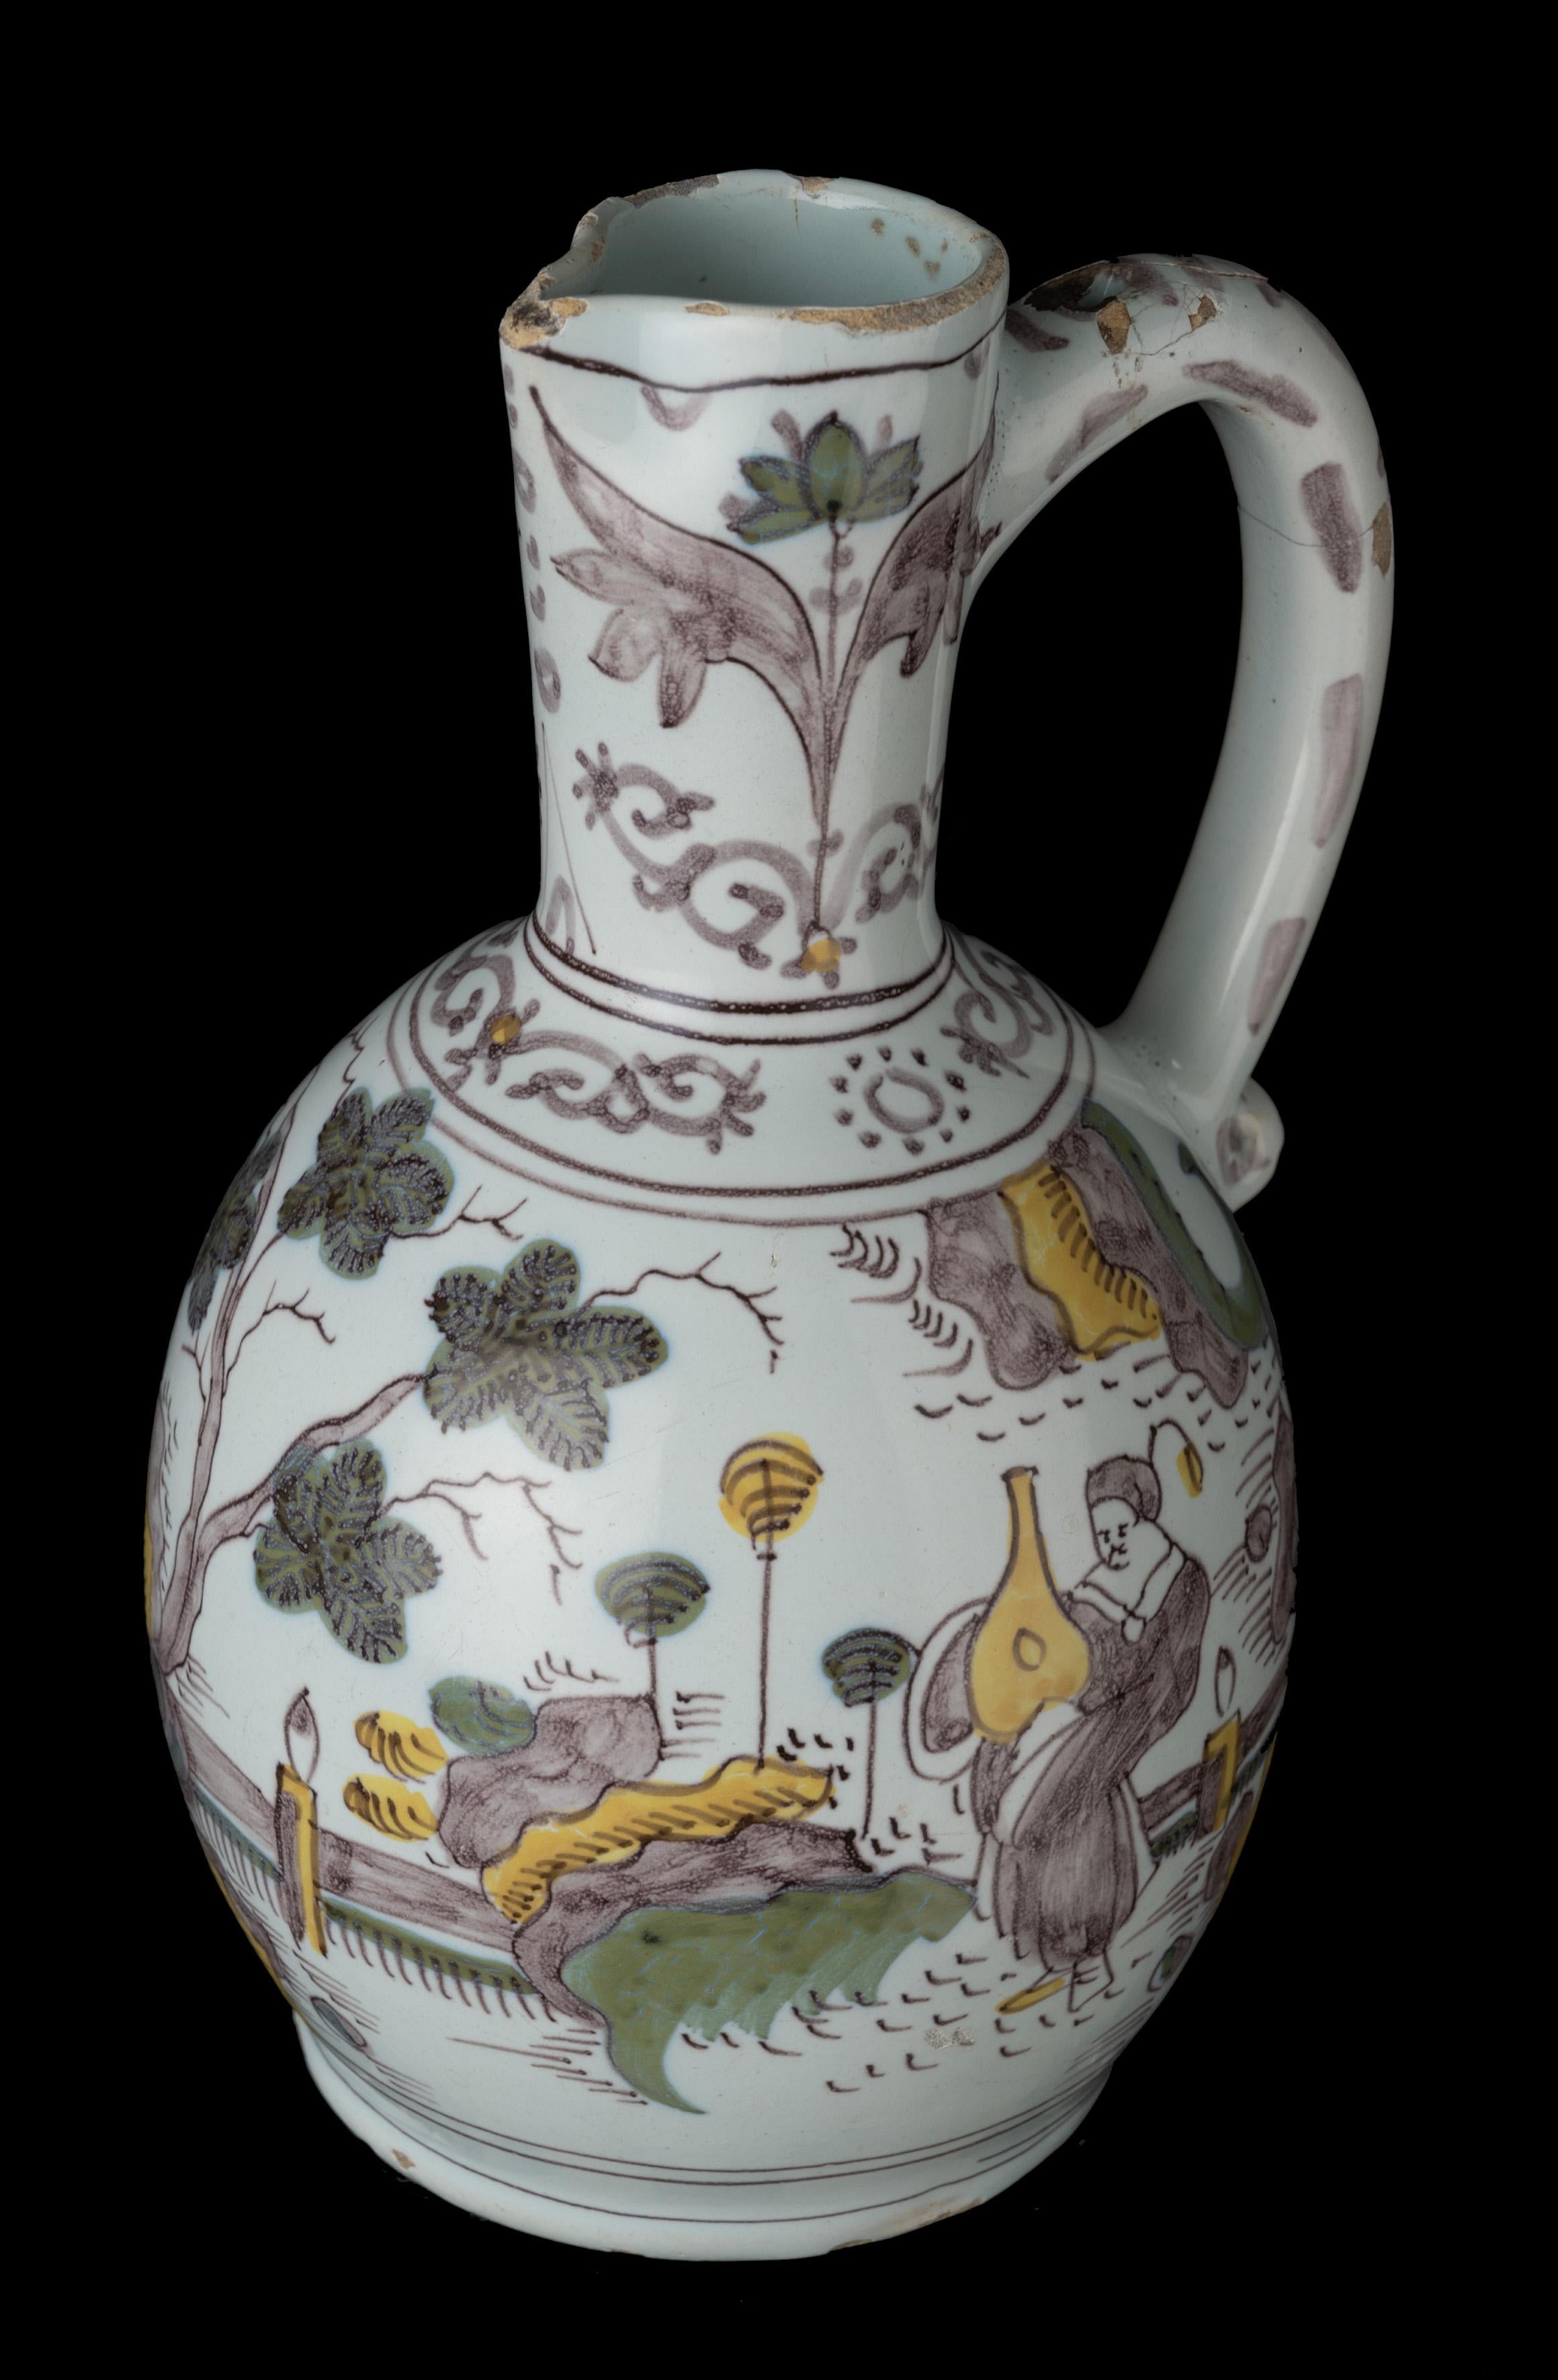 The polychrome wine jug has an ovoid body on a low spreading foot, a conical neck with spout and a handle with a scroll finish. The jug is painted in purple, yellow and green with a continuous chinoiserie landscape with three Chinese figures. A band